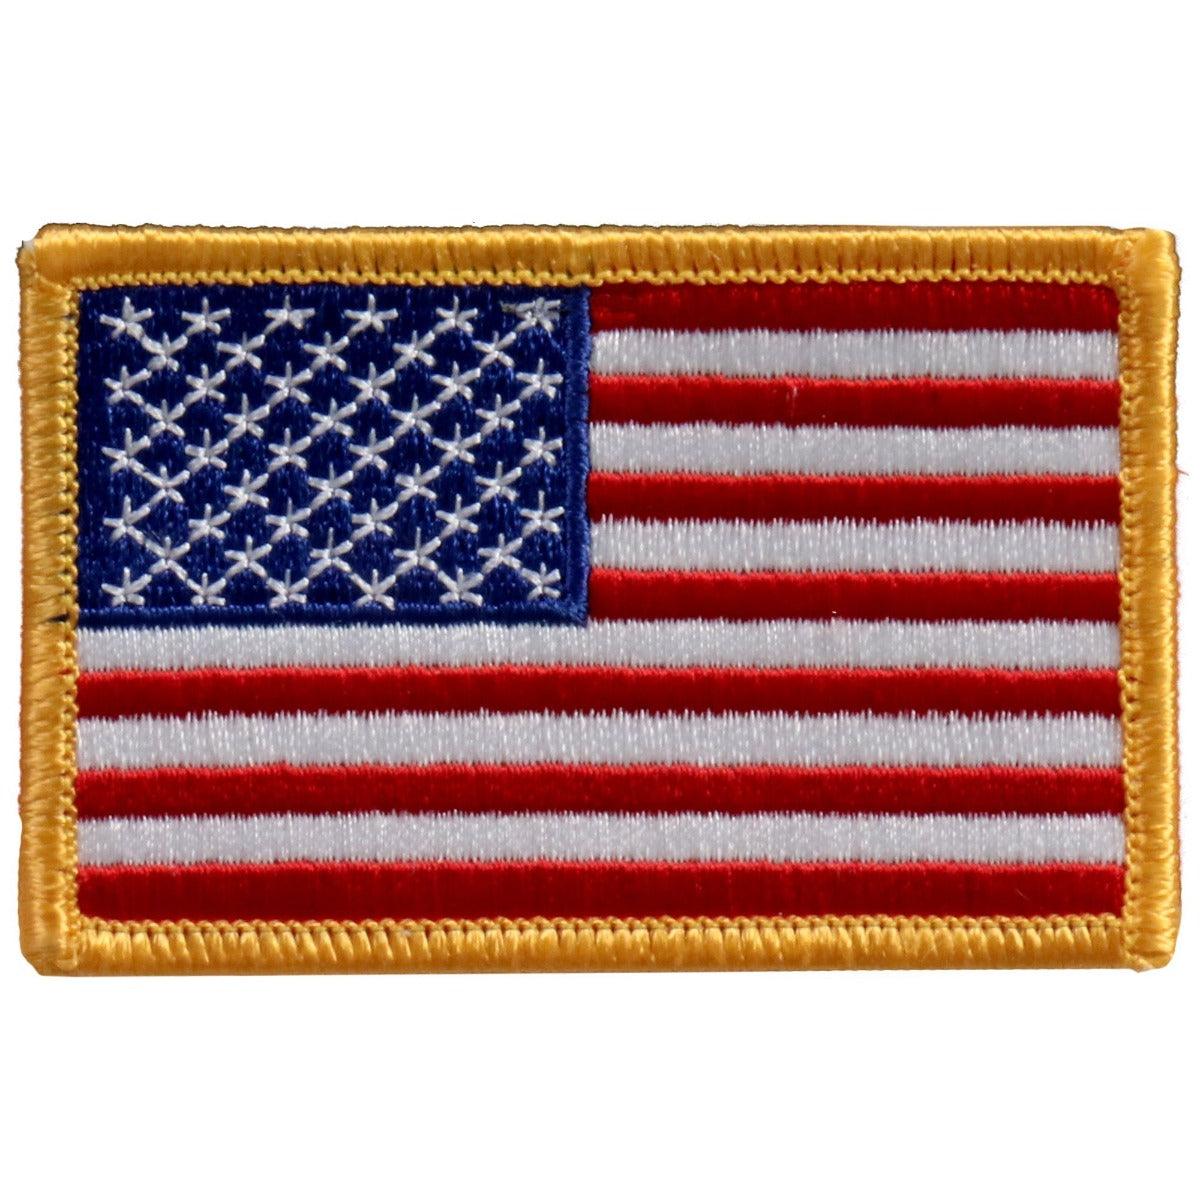 Hot Leathers 6" X 4" American Flag Patch - American Legend Rider